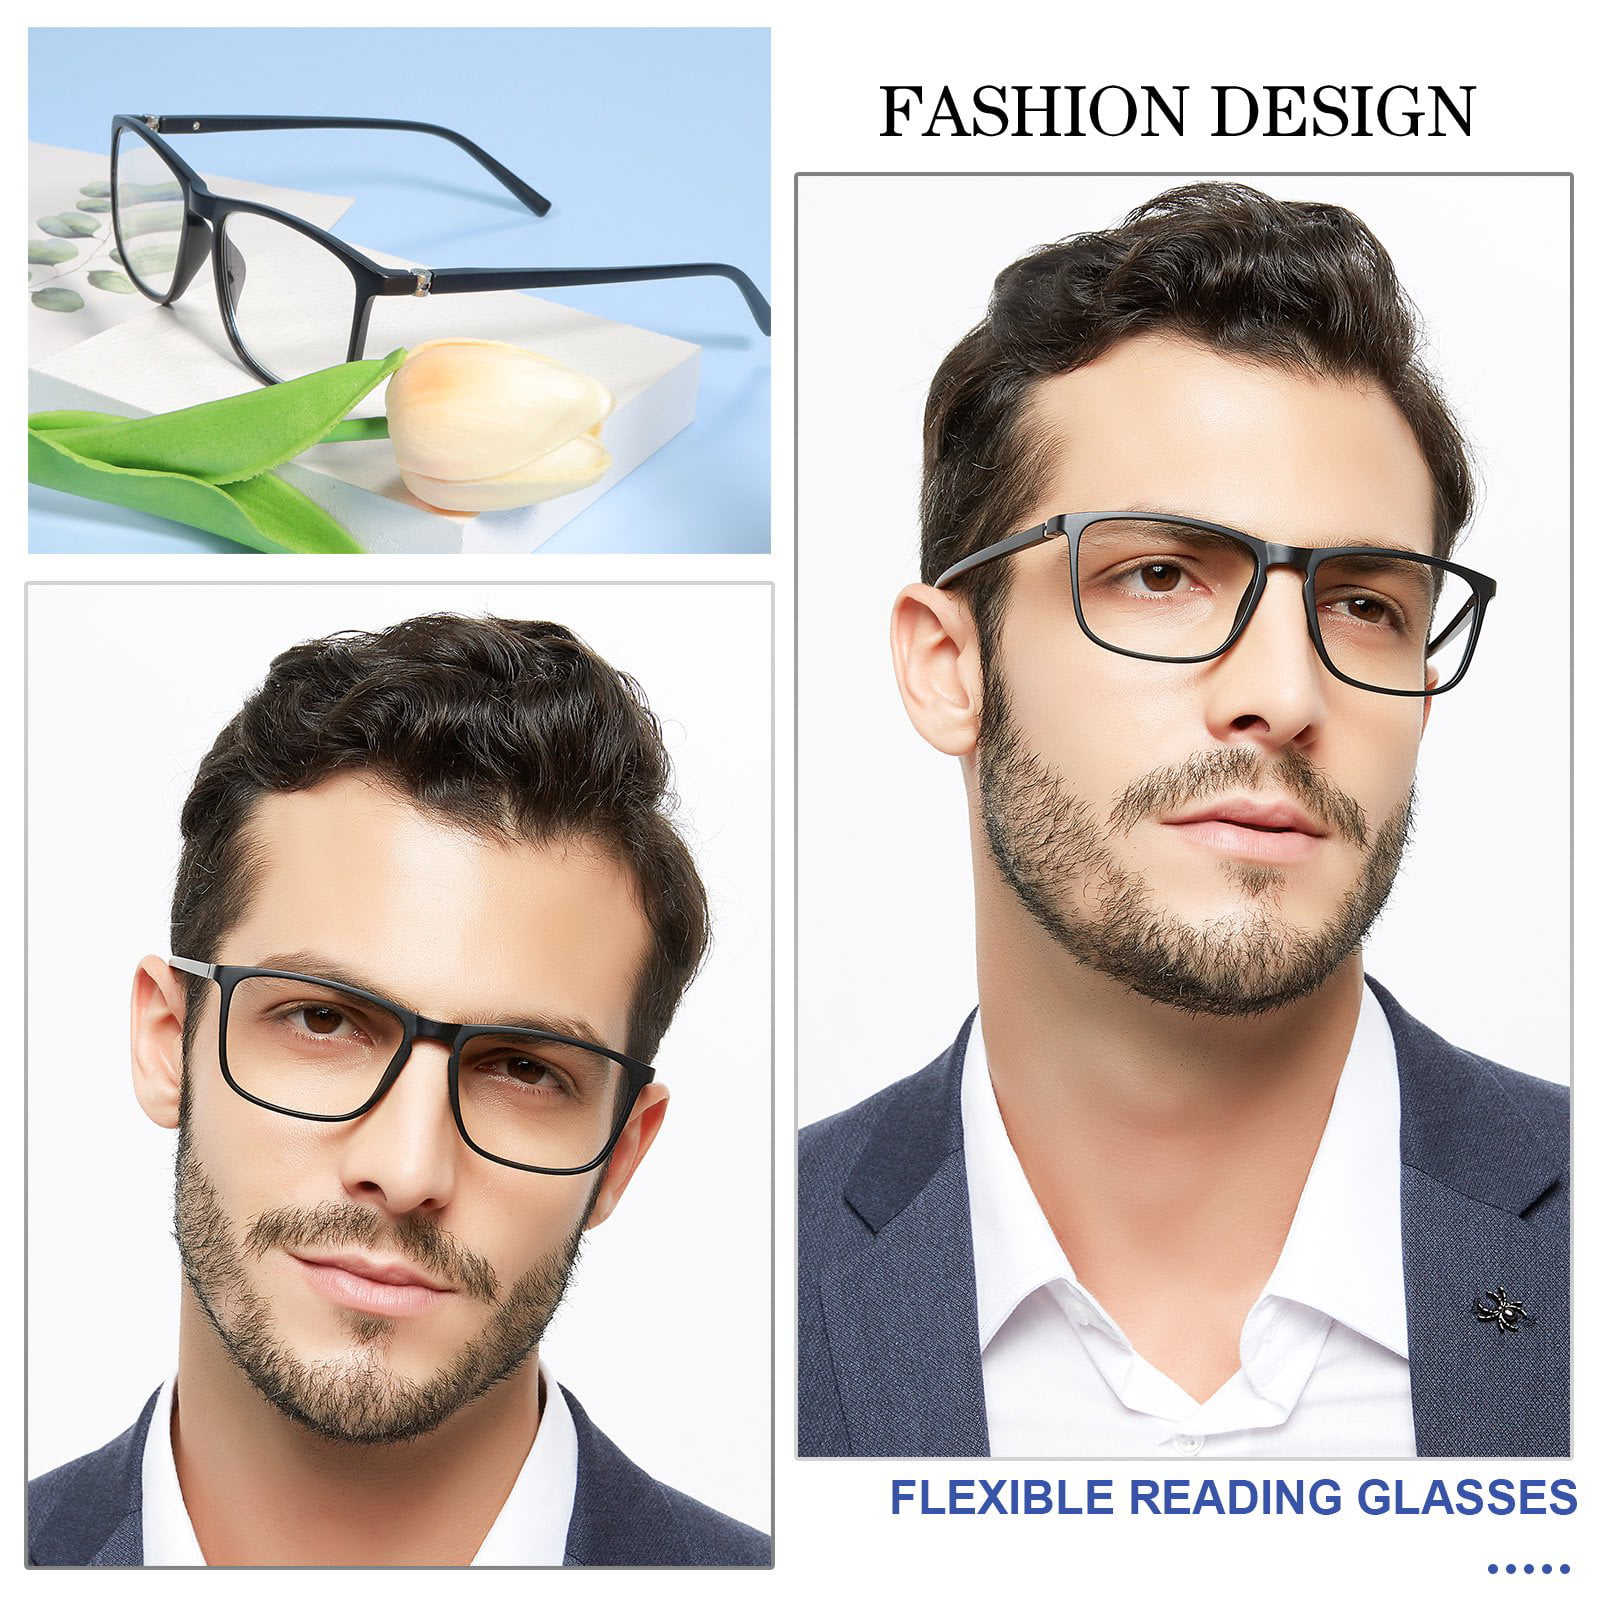 Designer Spring/Summer Prescription Sunglasses For Men For Men And Women  Classic Attitude Eyeglasses With Goggle Style For Outdoor Beach Activities  Mix Of Color Options And Signature Z0259U From Linling888, $14